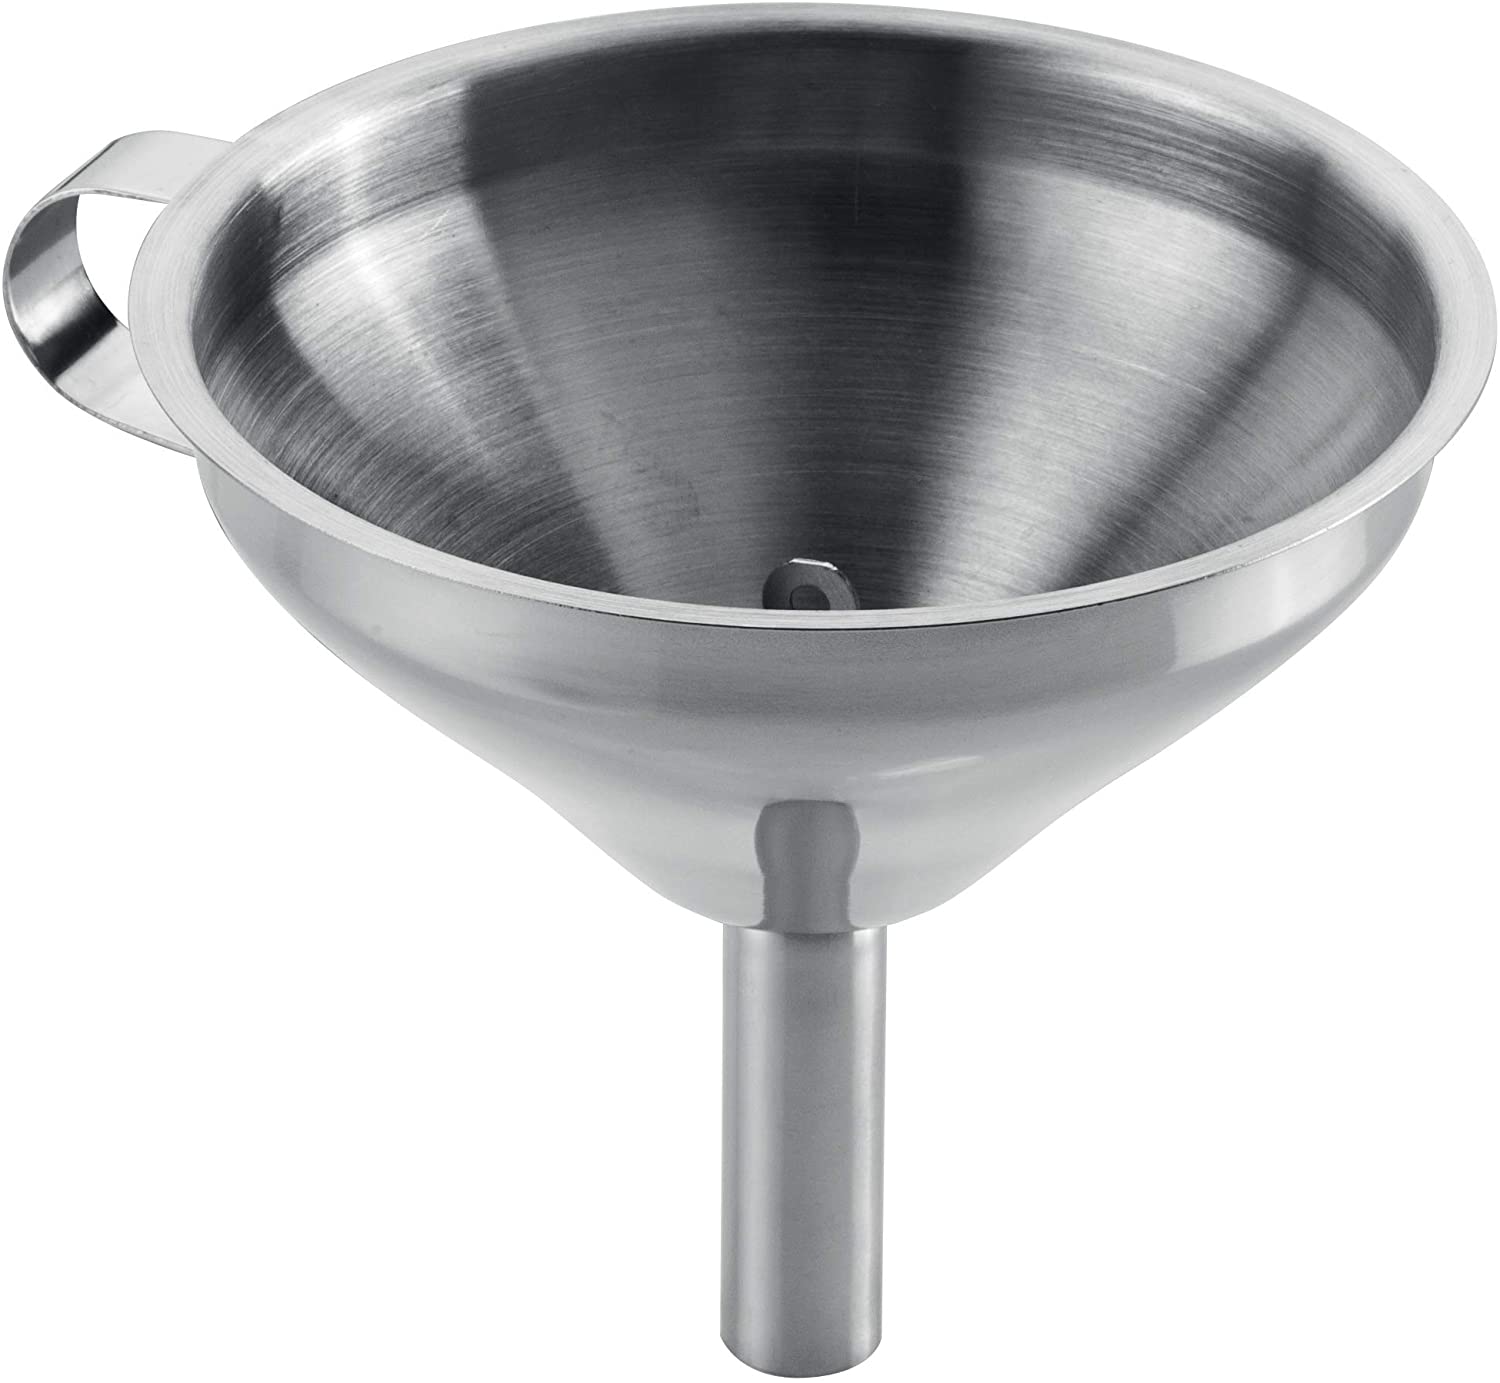 Tescoma 428660 Funnel, Stainless Steel, Grey